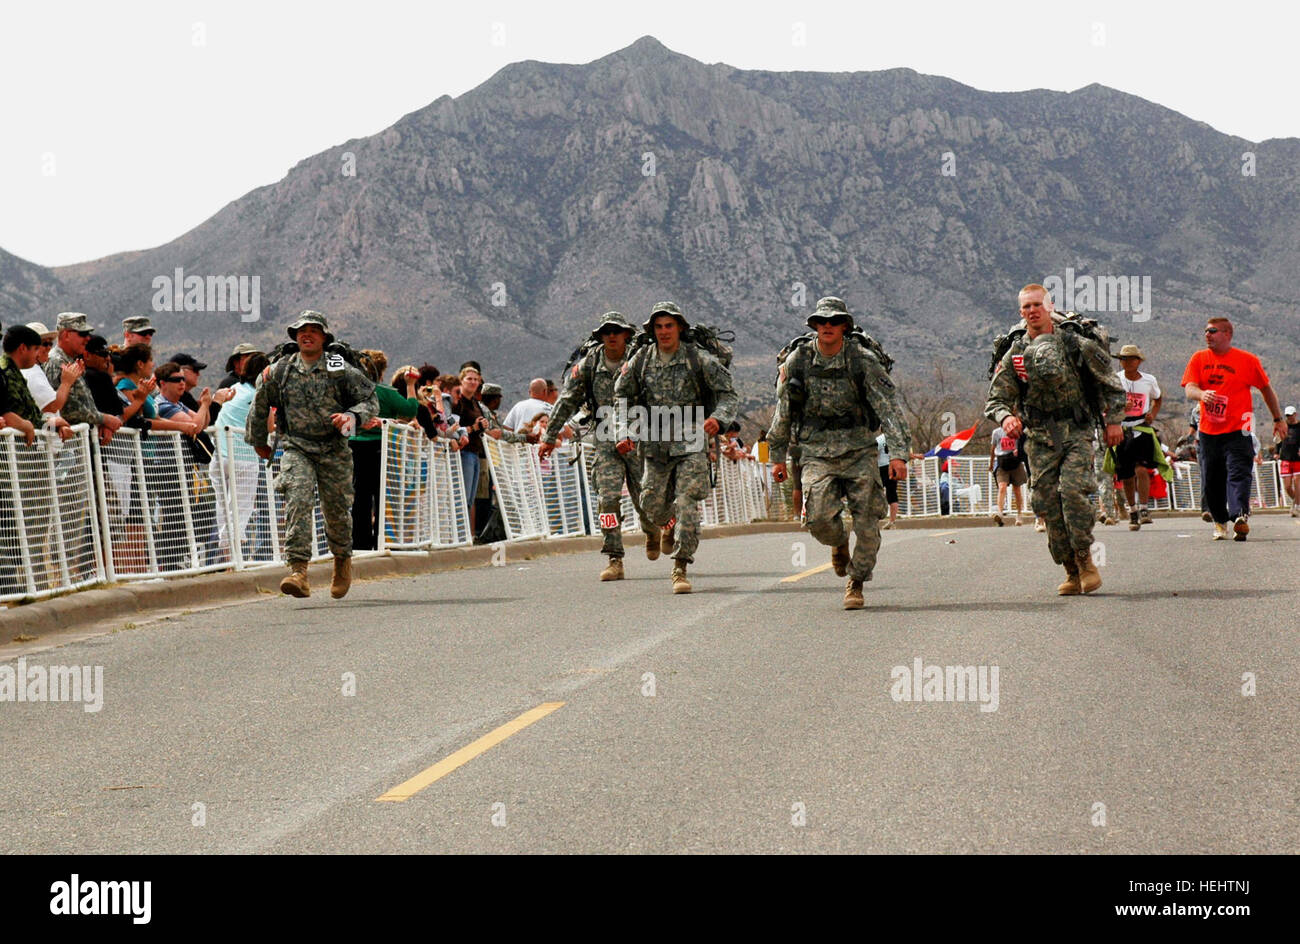 Team Juggernaut, made up of five soldiers from Green Bay-based Company B, 2-127th Infantry, crosses the finish line in first place in the National Guard Heavy category at the 20th Annual Bataan Memorial Death March marathon, White Sands Missile Range, N.M., March 29. Team members are Spc. Andrew Vannieuwehoven, Green Bay; Pfc. Jesse Tlachac, Sturgeon Bay; Sgt. Ryan Gries, Madison; Pfc. Eric Sallenbach, Green Bay and Pfc. Kyle Cooper, Appleton. Bataan Memorial Death March Honors World War II Soldiers 162256 Stock Photo